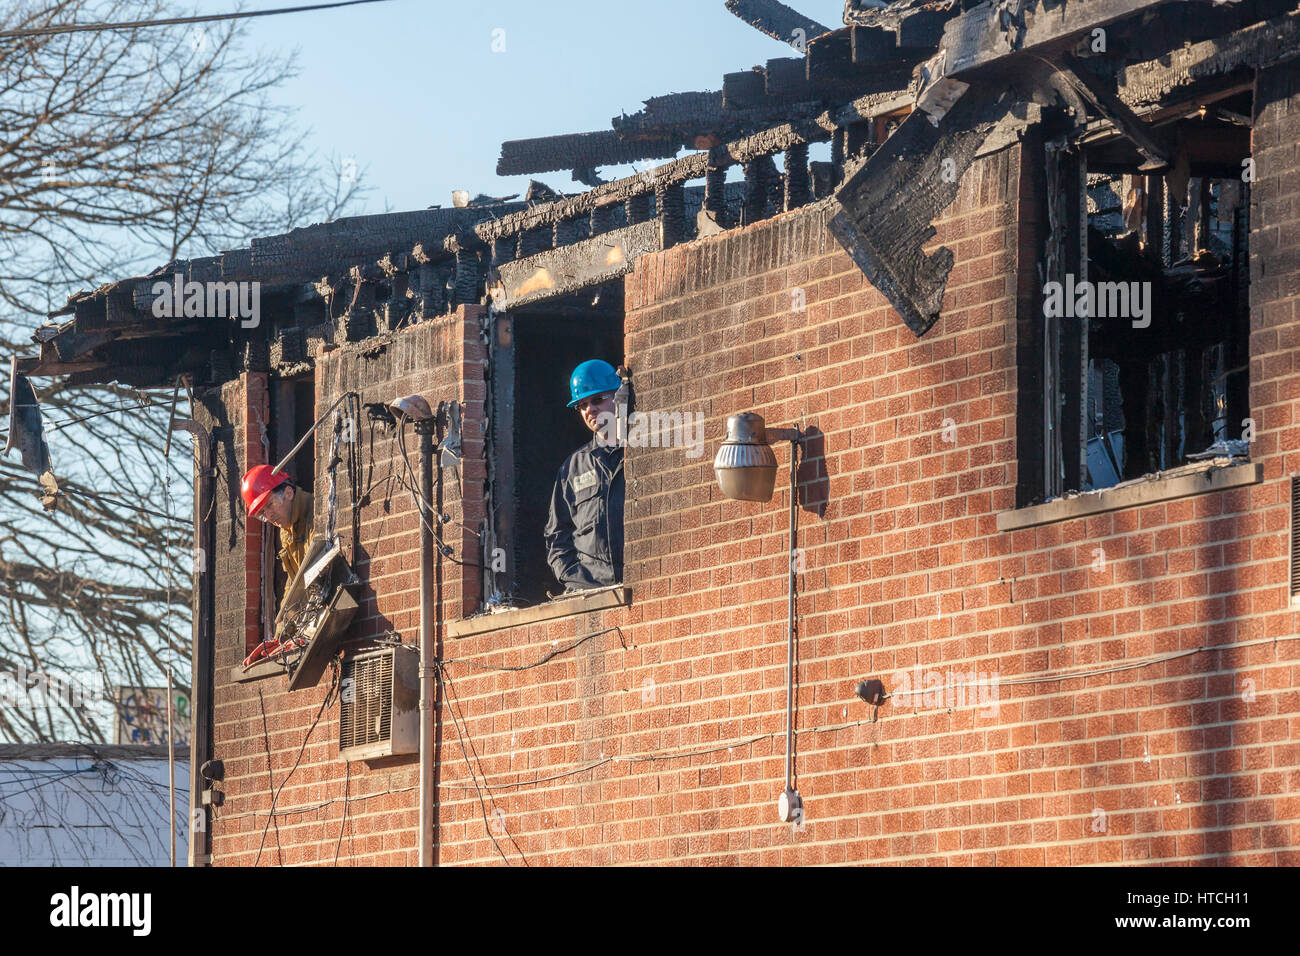 Detroit, Michigan - Police and fire department arson investigators at the scene of an apartment fire that killed five people. The deliberately-set fir Stock Photo